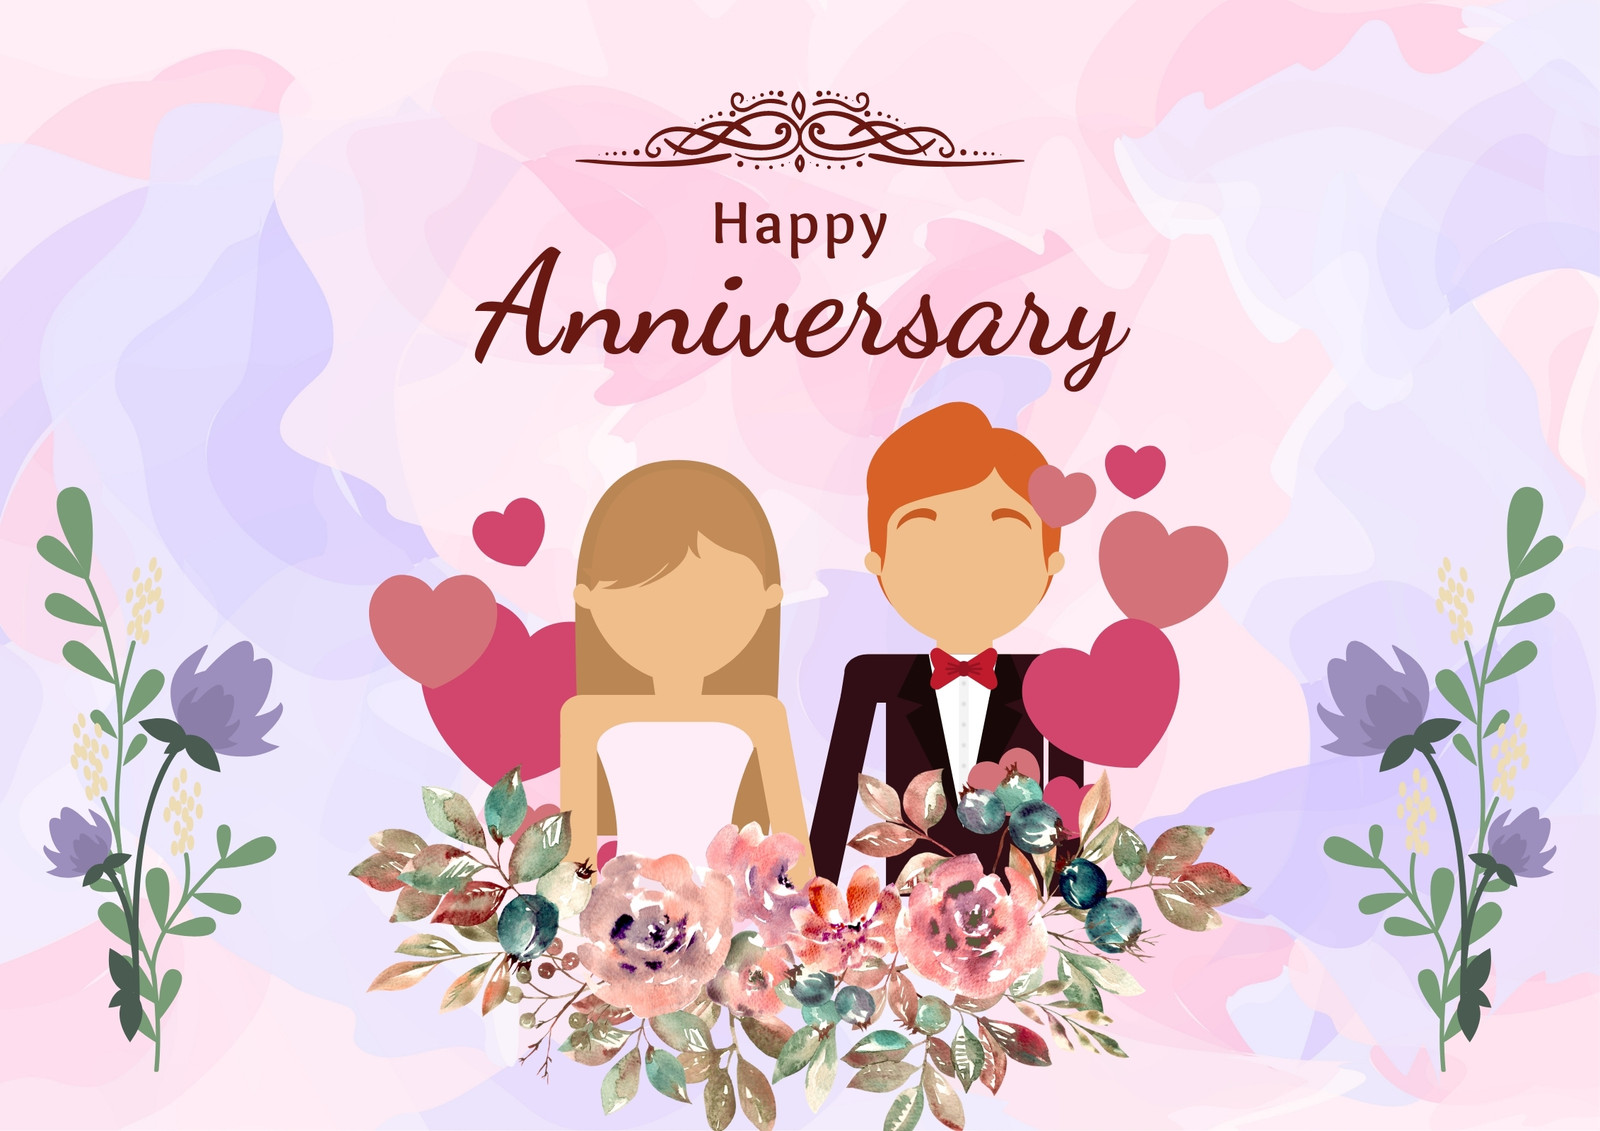 Free and customizable anniversary templates